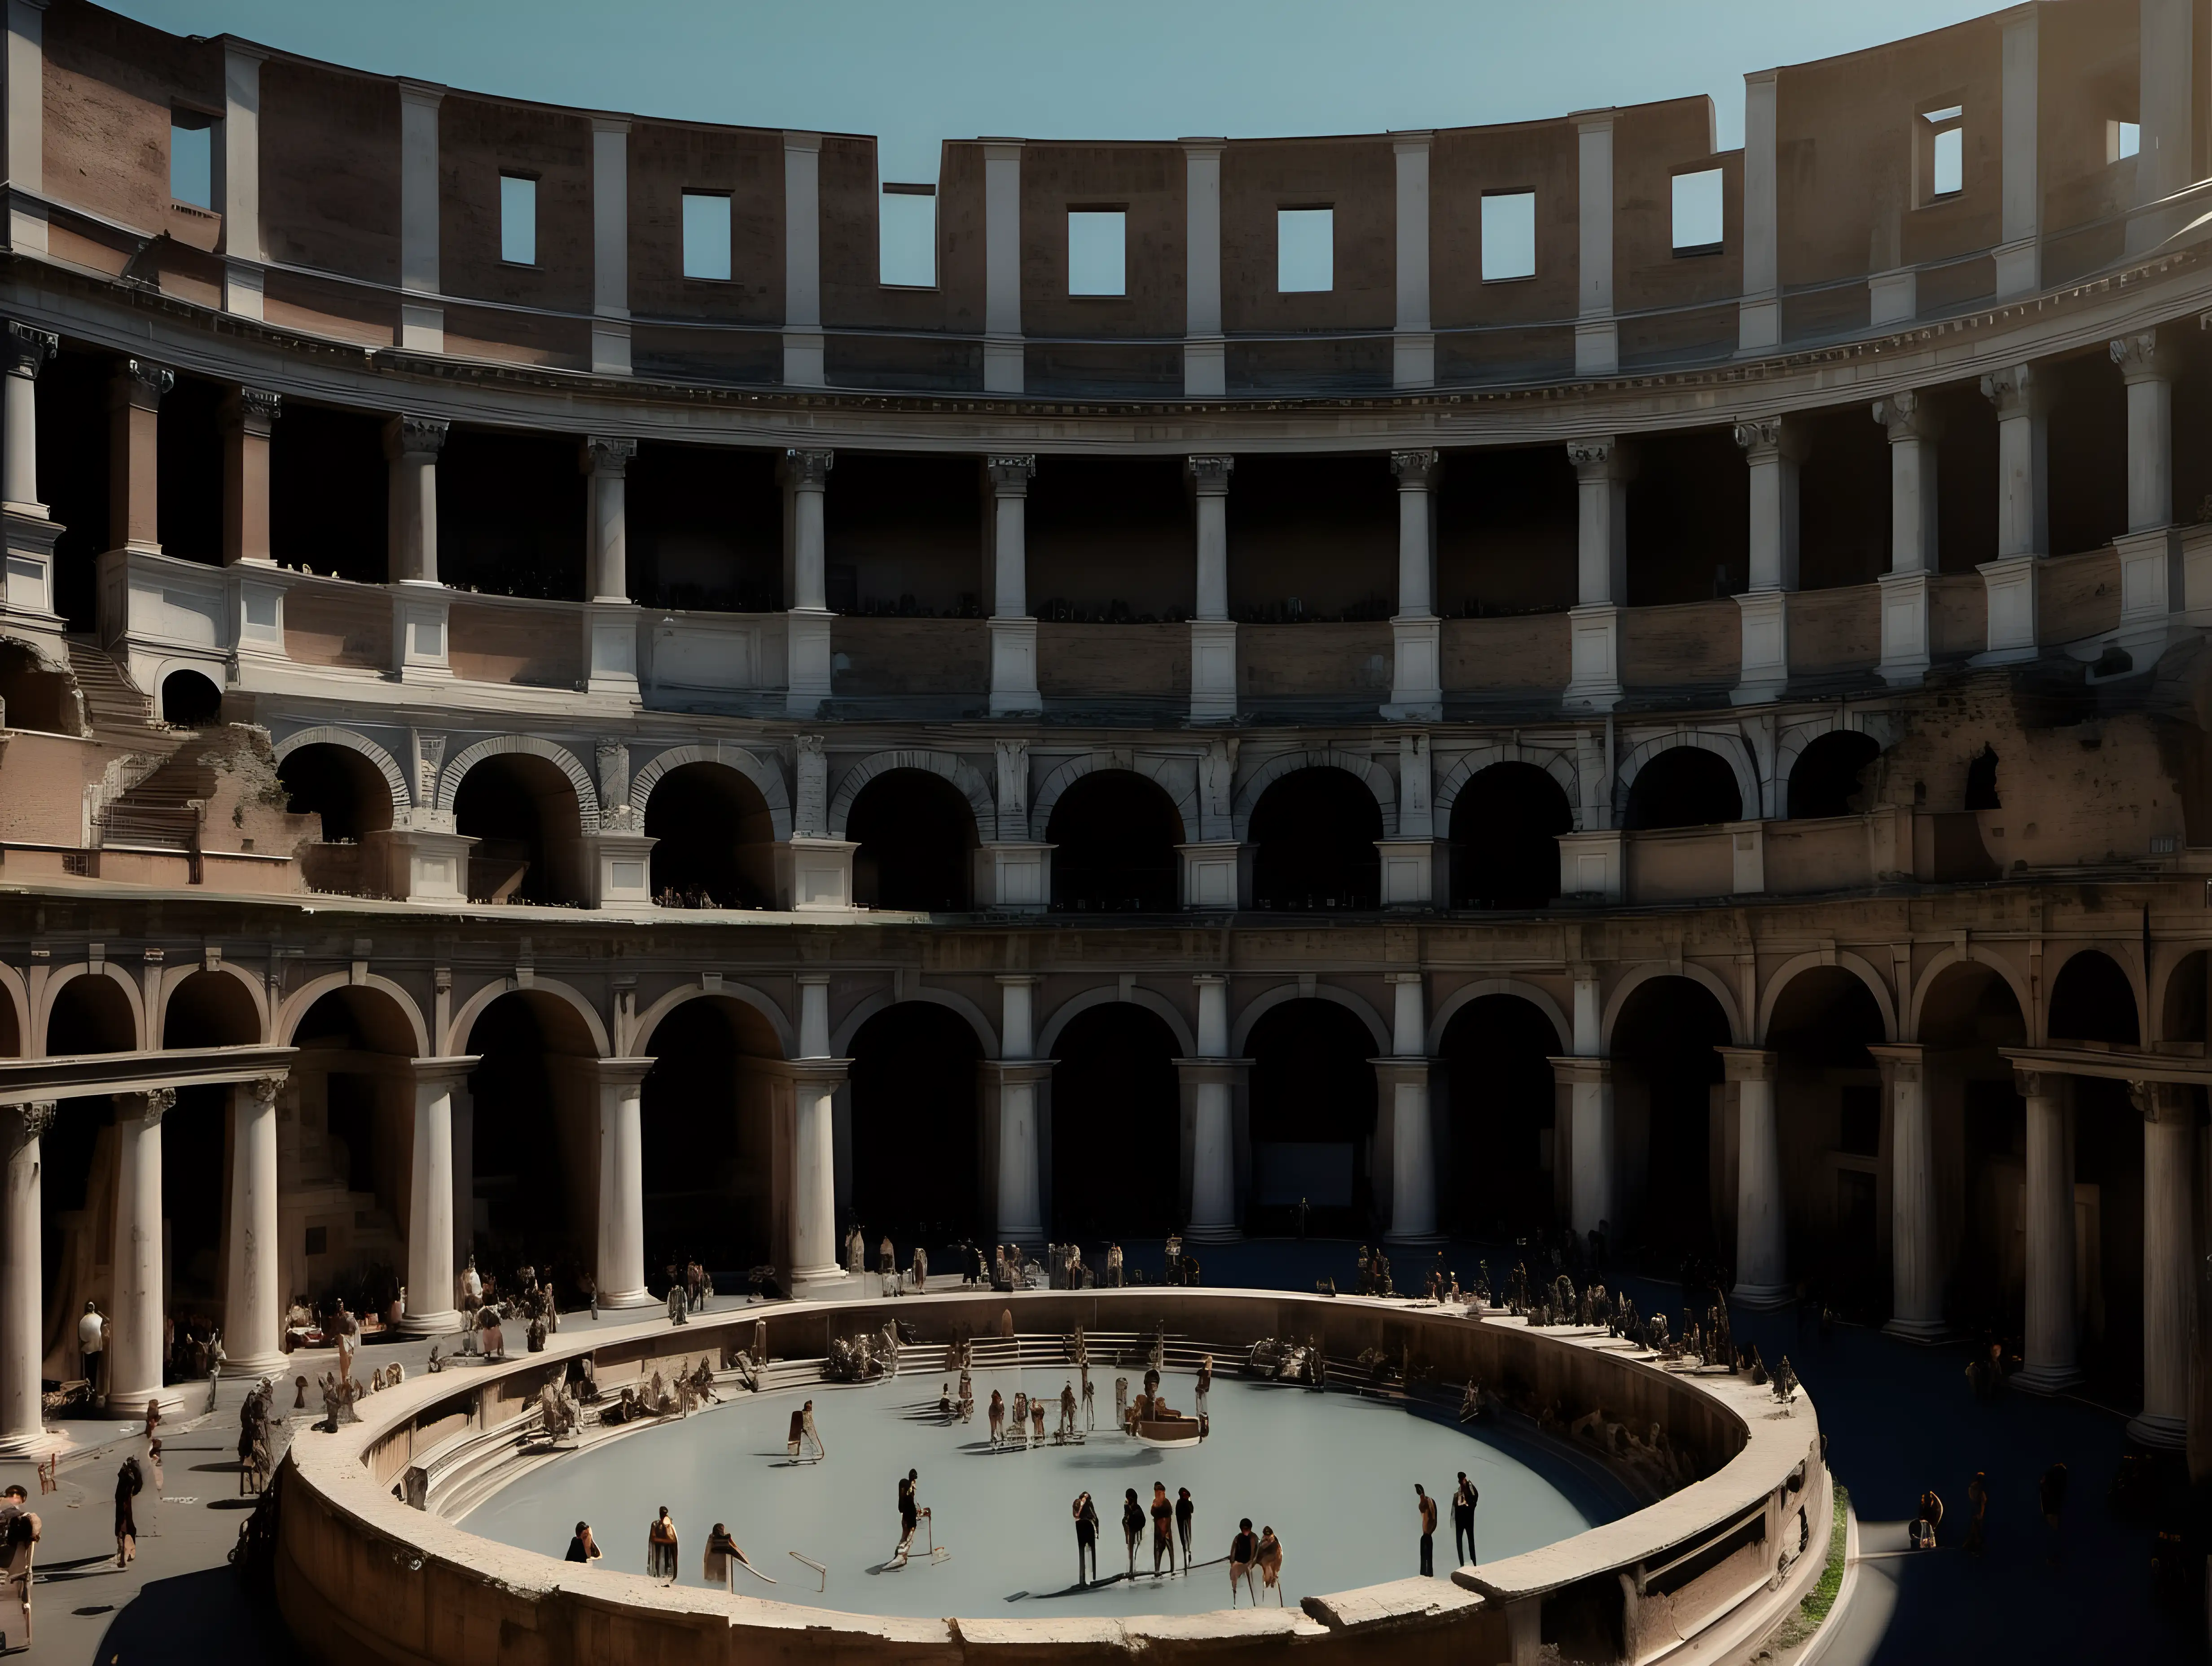 2 story high bath house in ancient Rome at daylight with musicians wandering around